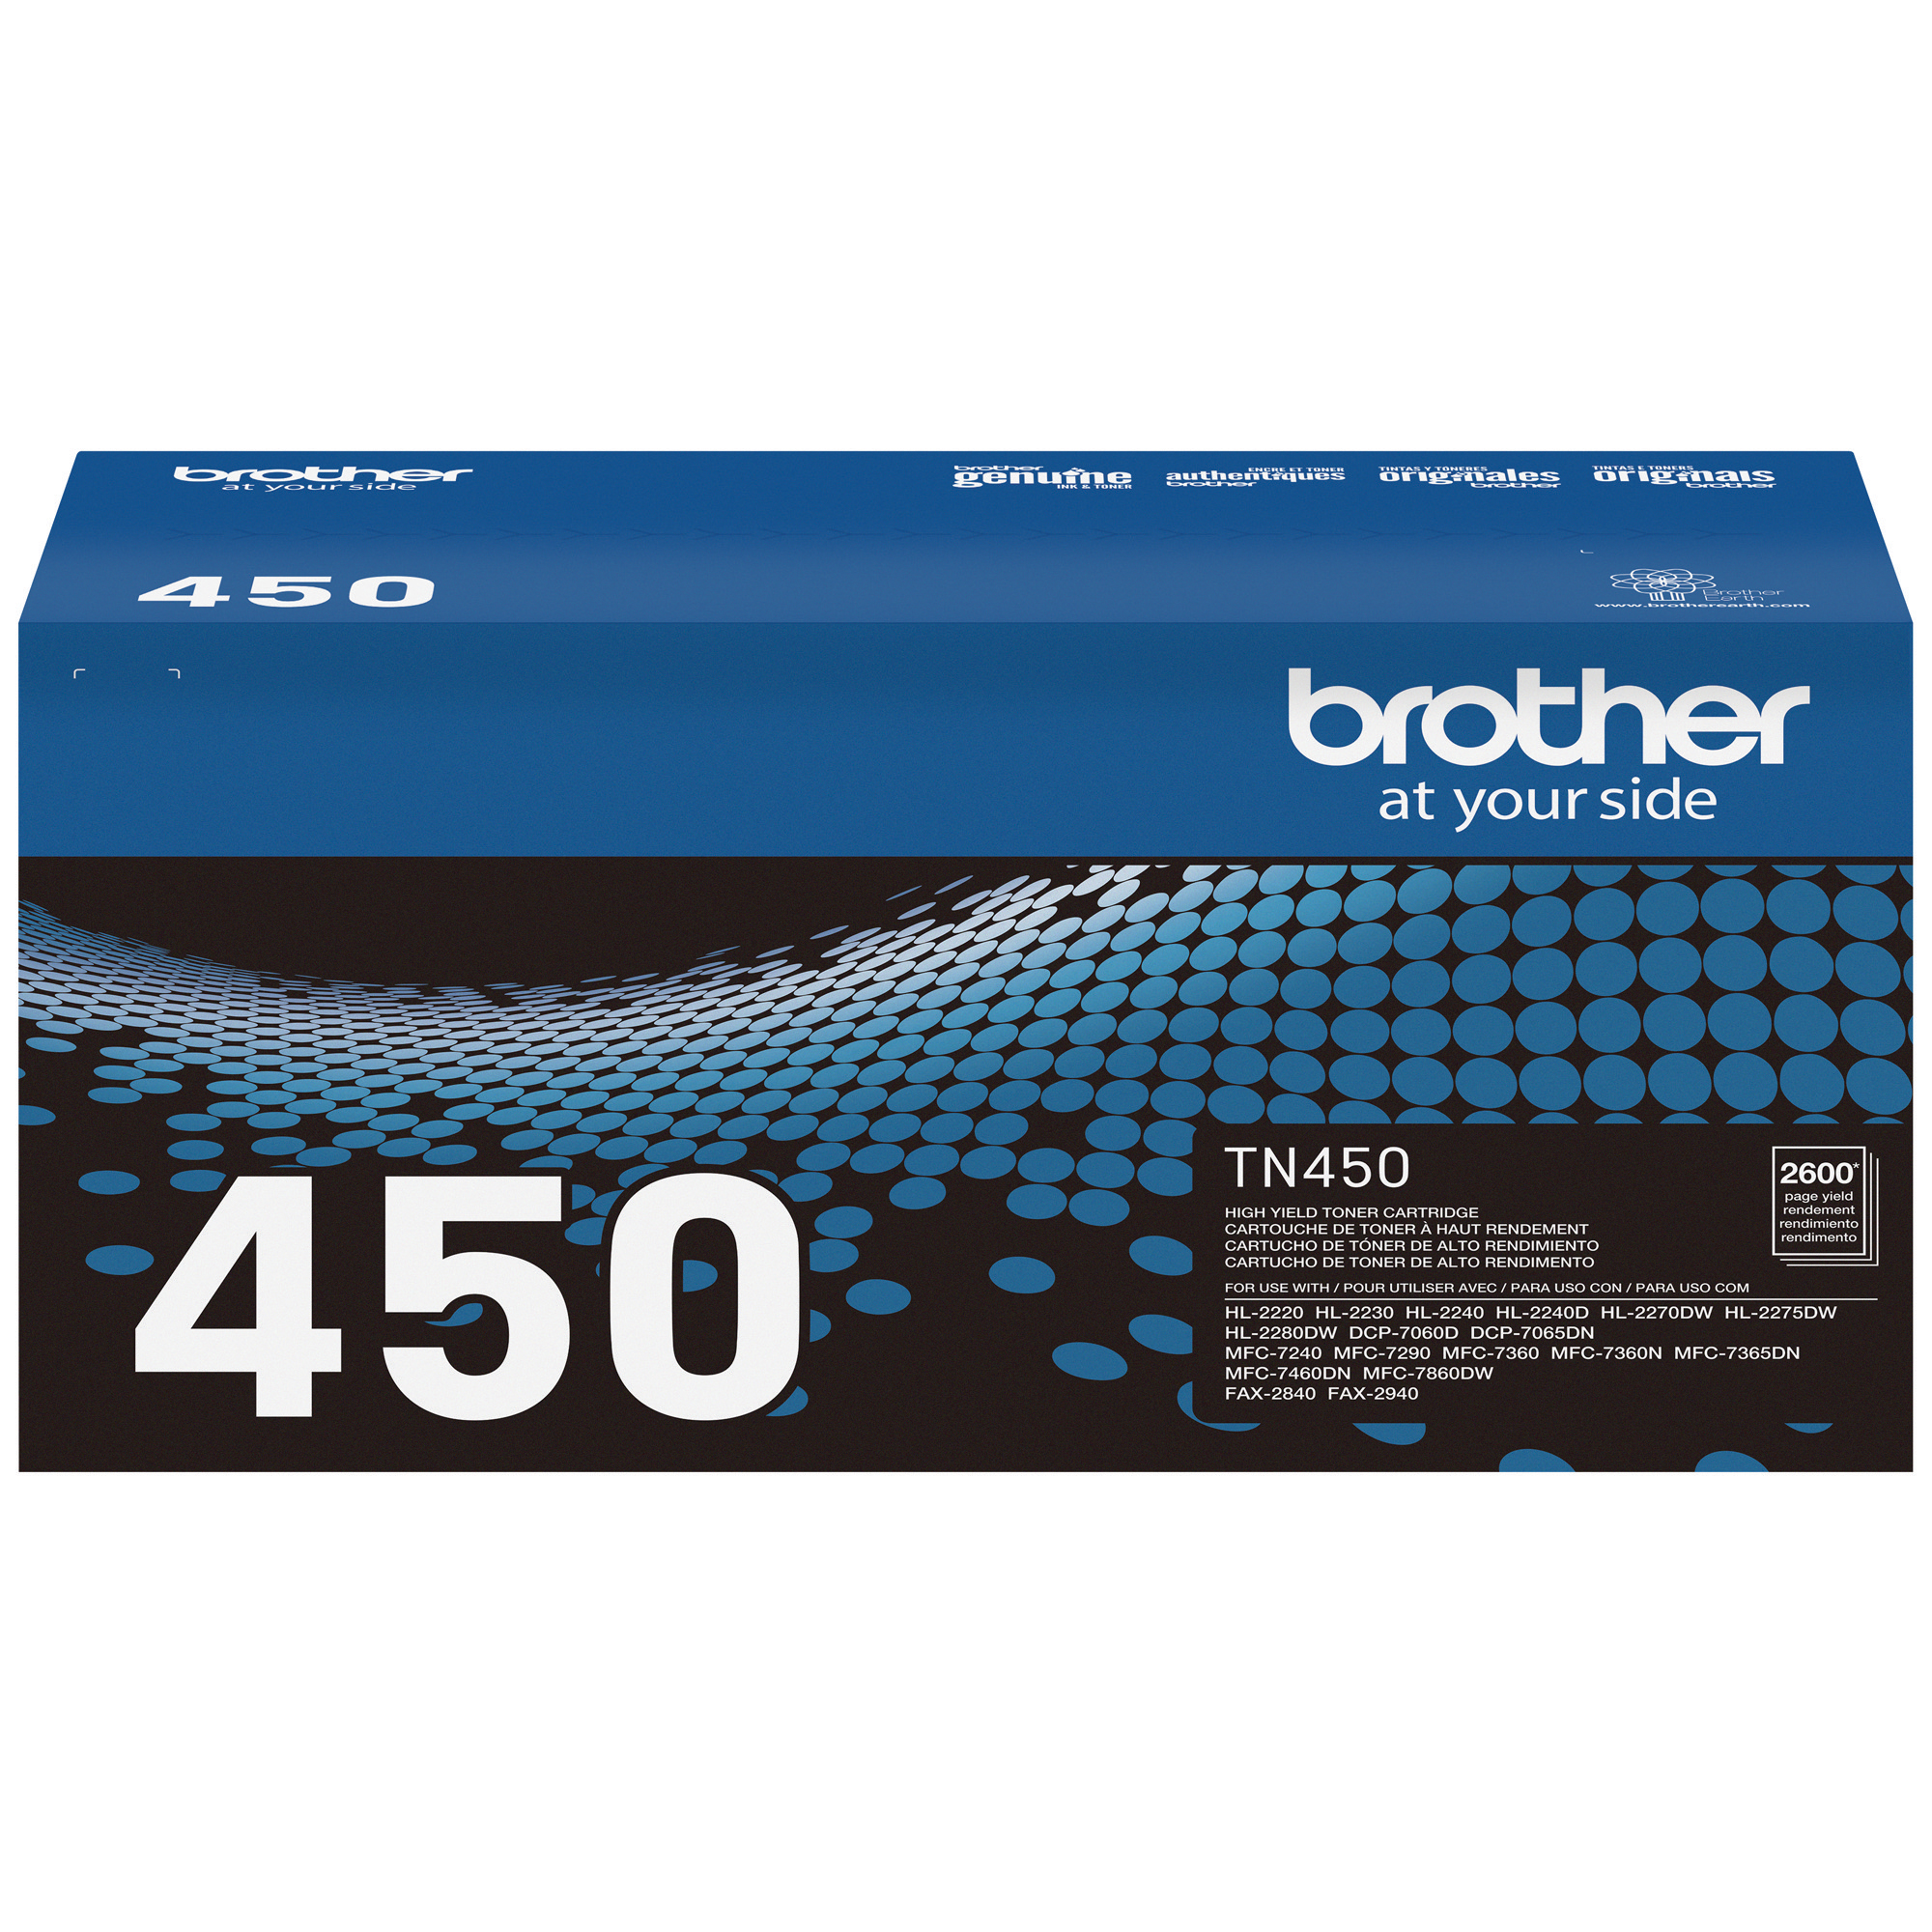 Brother MFC-7360N Monochrome Laser Multifunction - Brother Canada